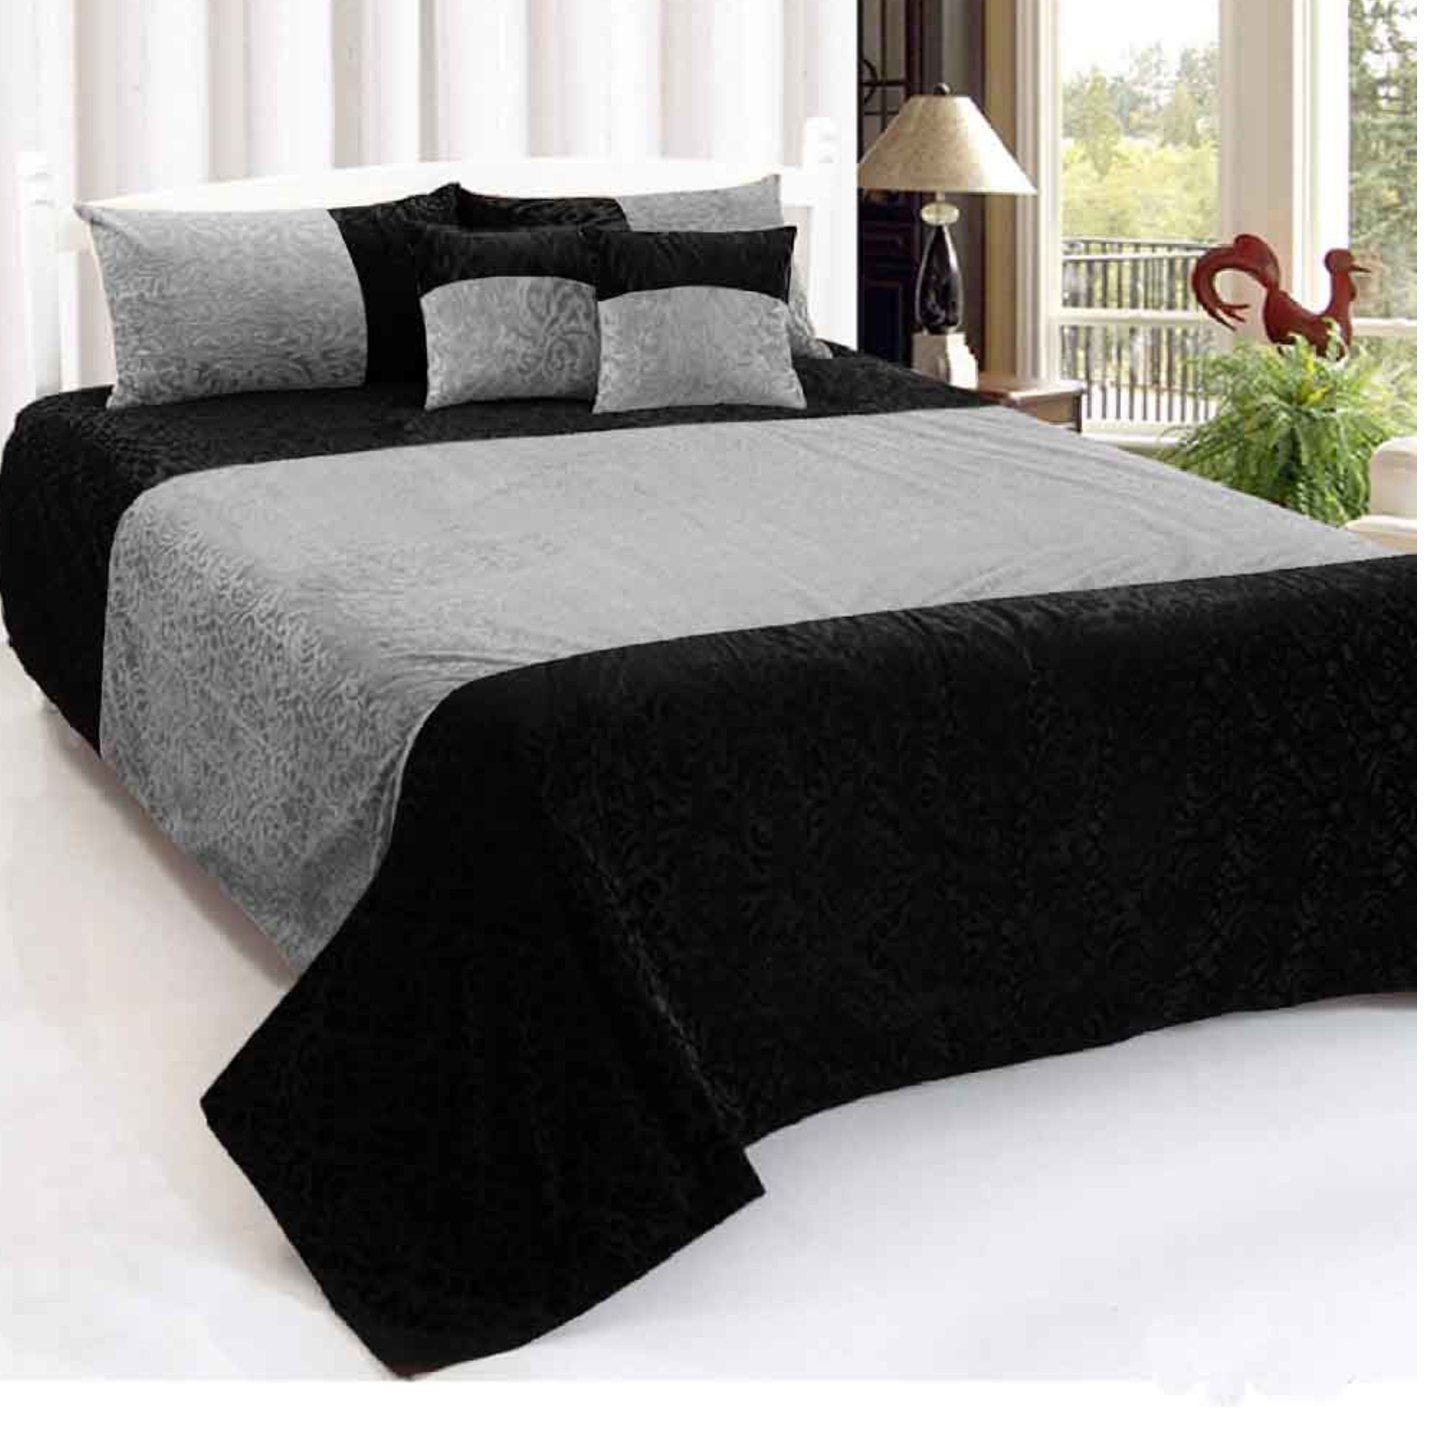 Double BedsheetPreimum Velvet Double Bedsheet,2 cushion cover and 2 pillow cover